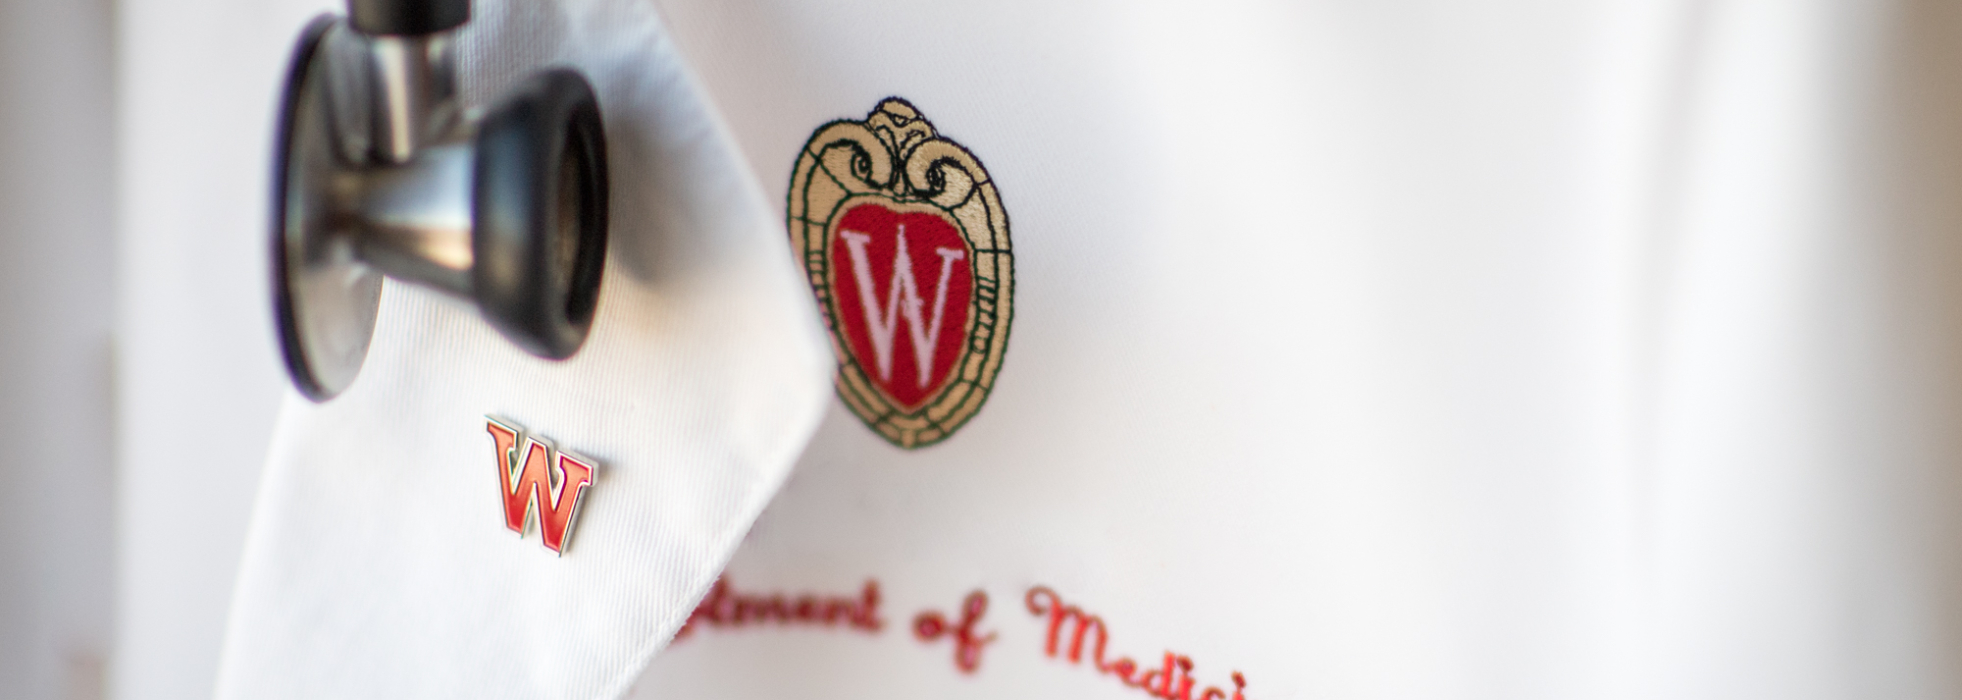 Closeup of white lab coat with Department of Medicine logo and stethoscope